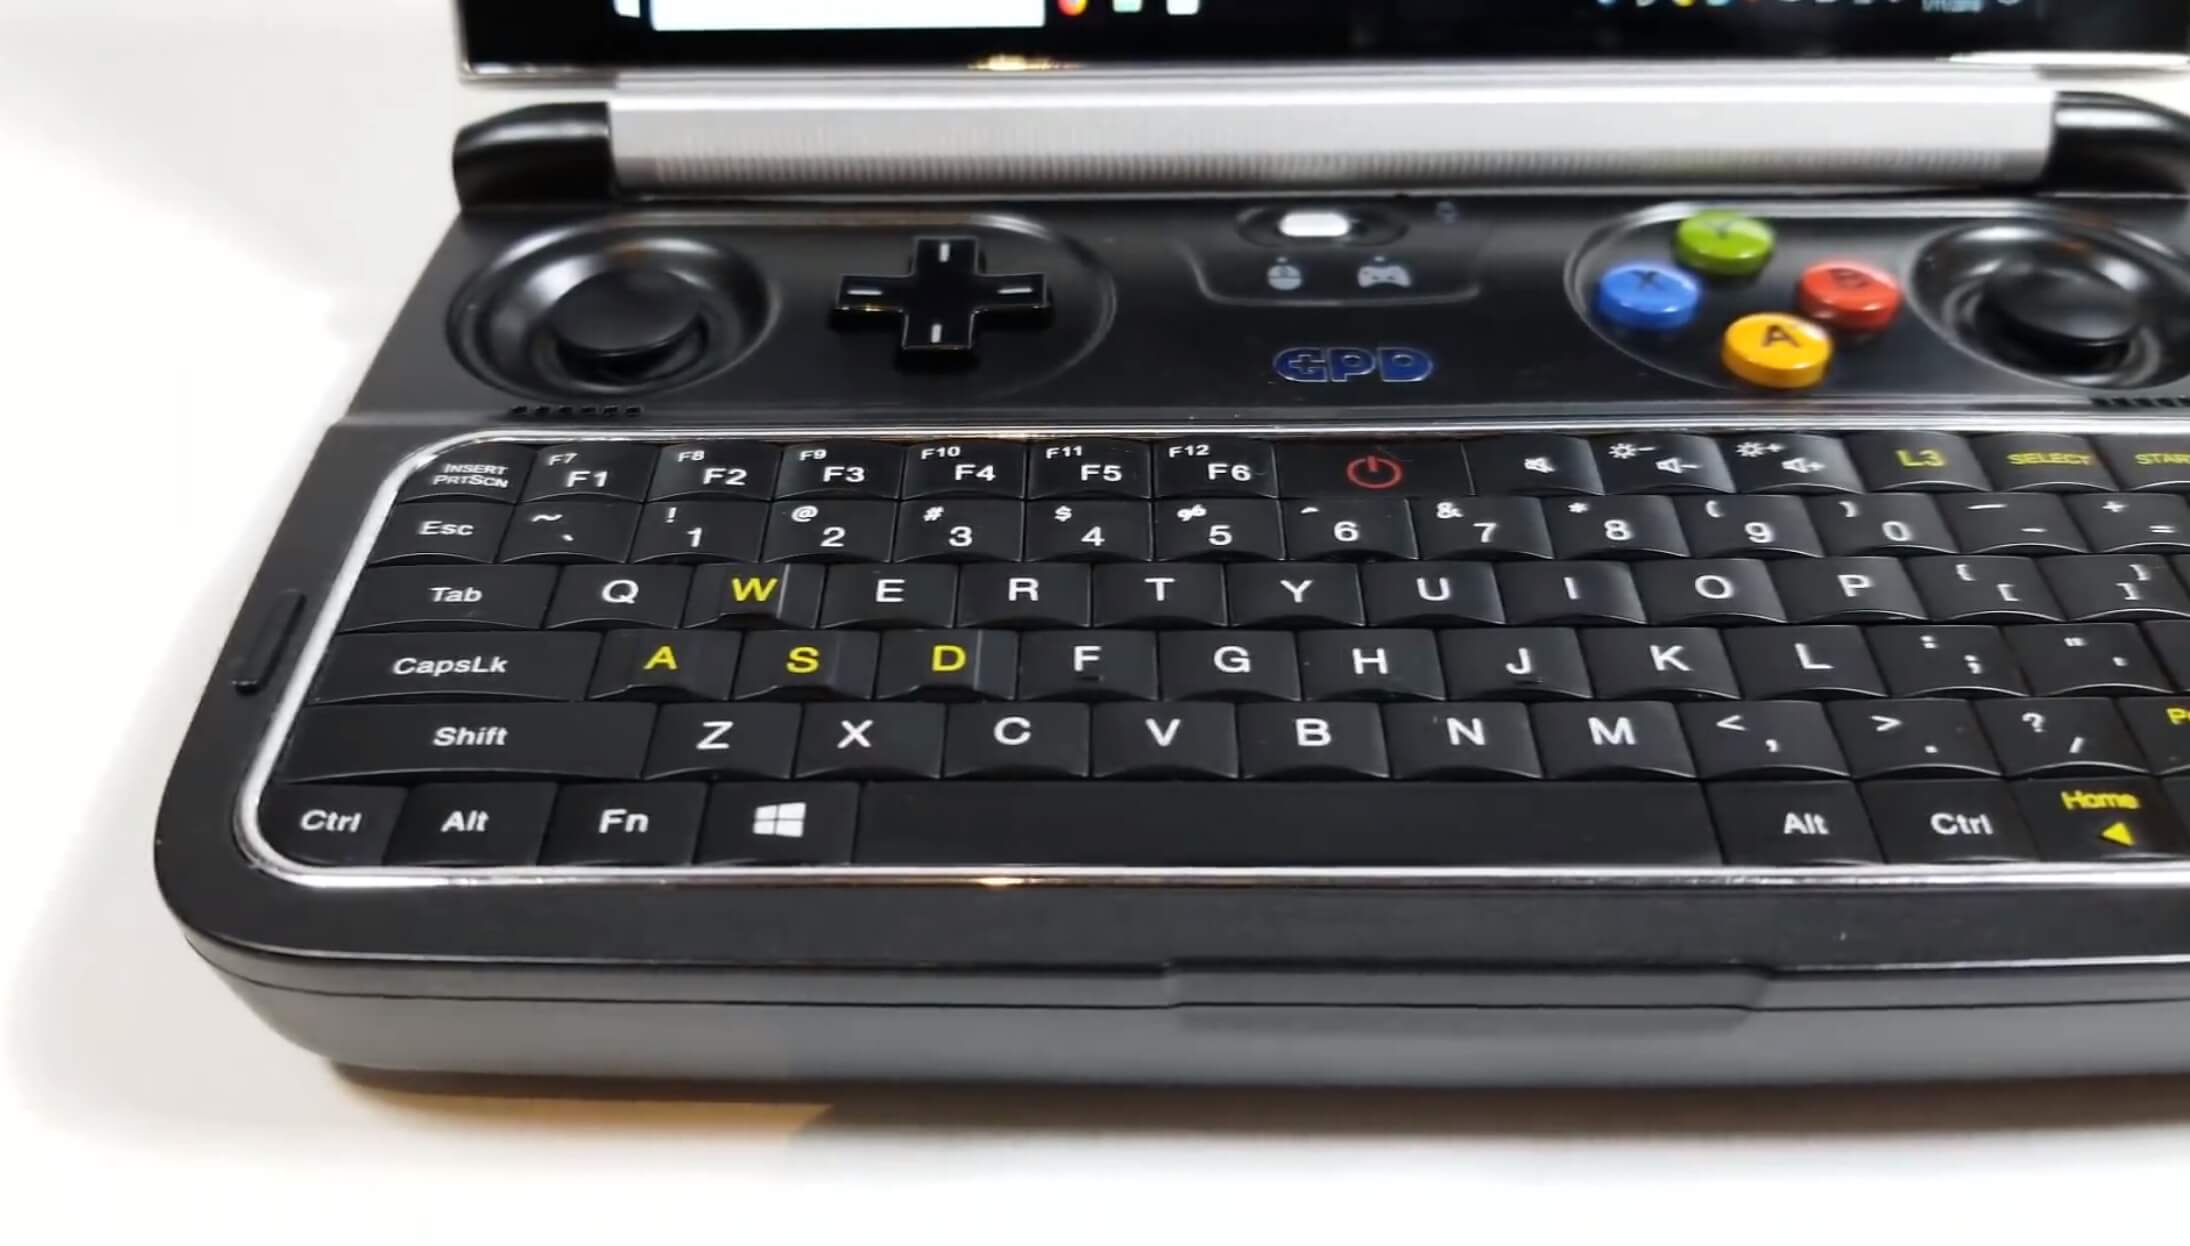 The GPD Win 2 is a $649 handheld gaming laptop